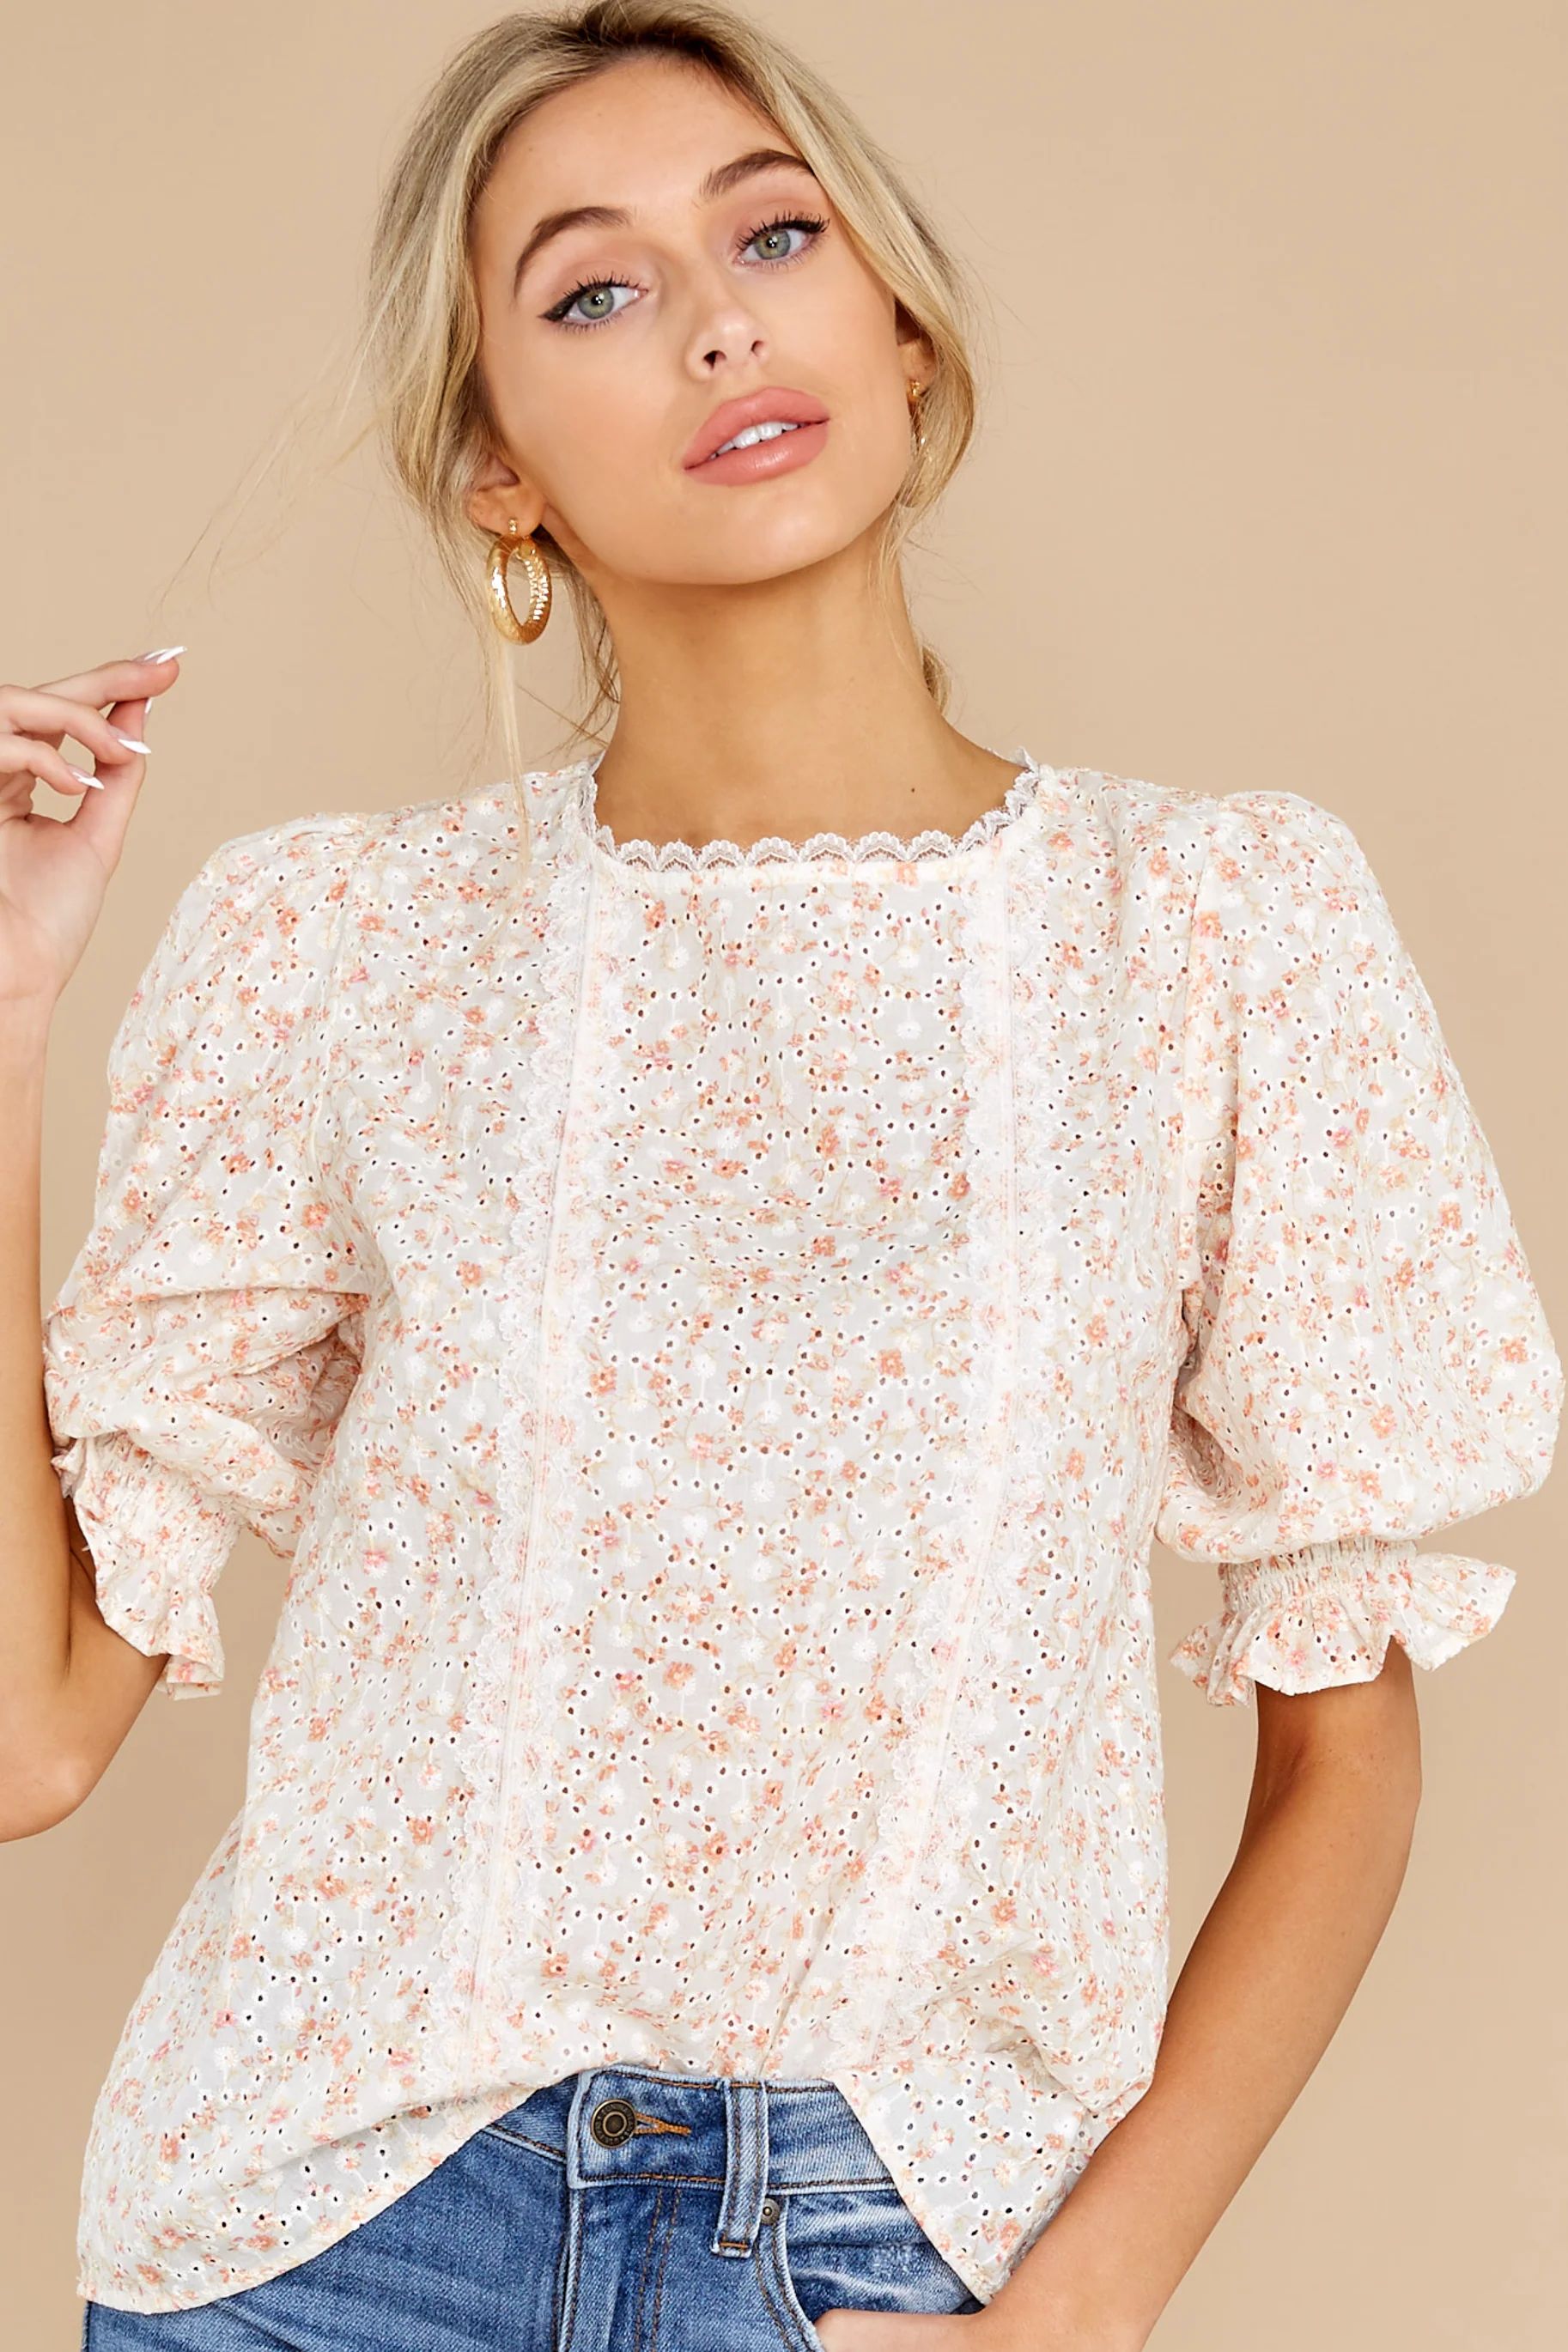 Spring Up Daisy Ivory And Orange Floral Top | Red Dress 